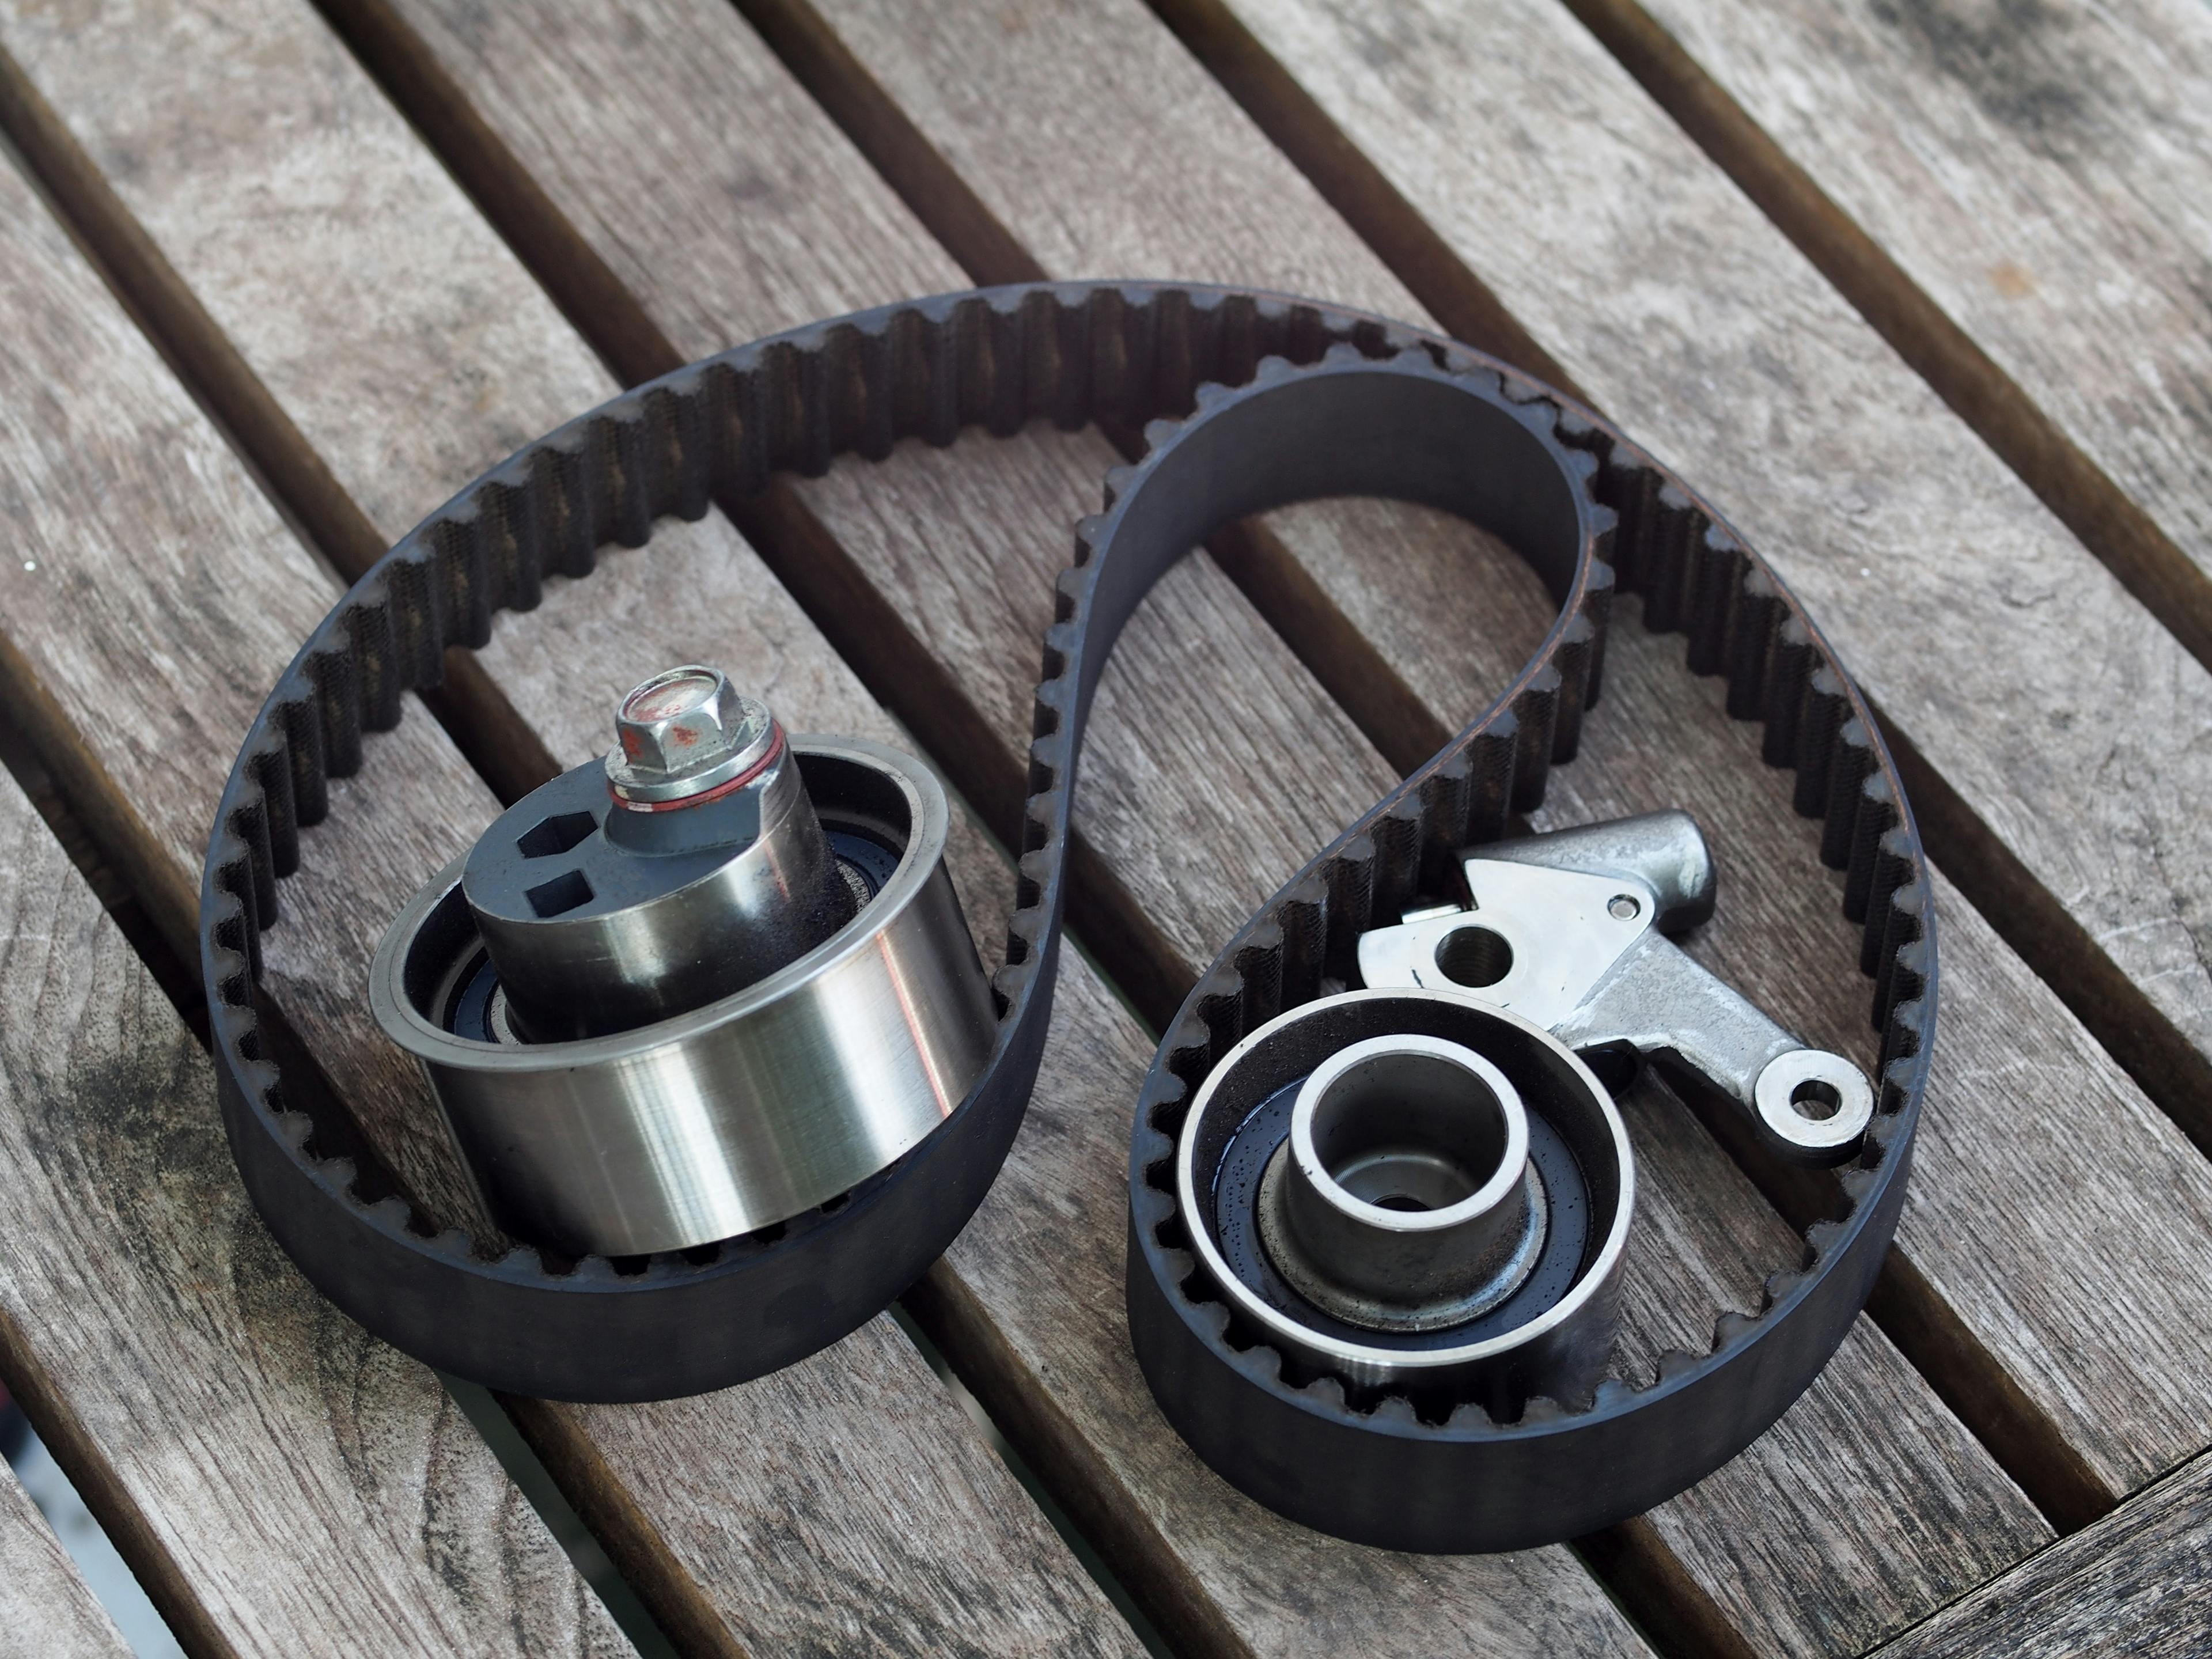 A timing belt, tensioner and idler pulley sitting on a wooden surface